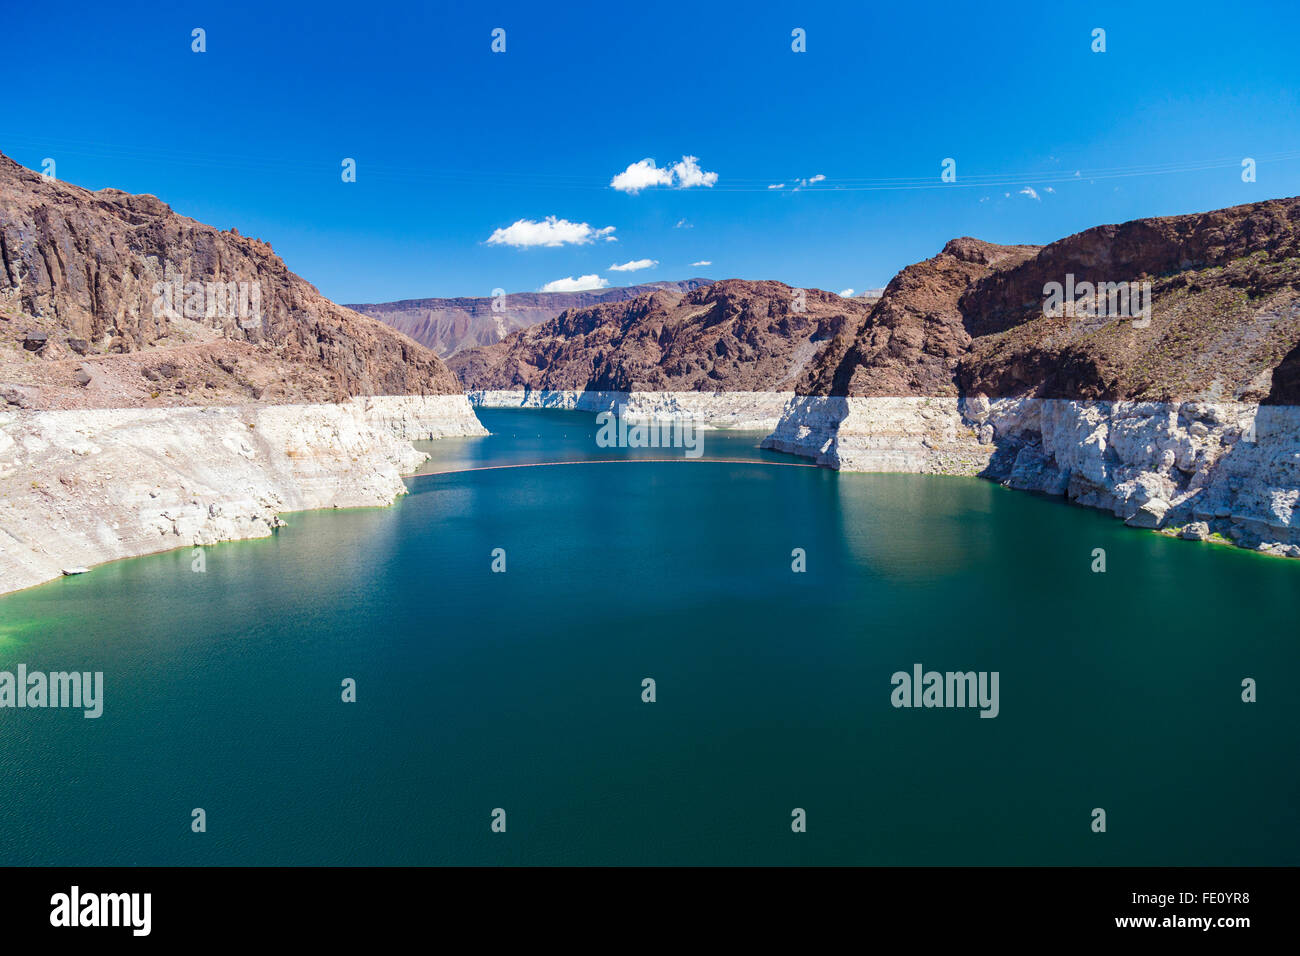 Hoover Dam Intake (Penstock) Towers in Nevada, United States Stock Photo